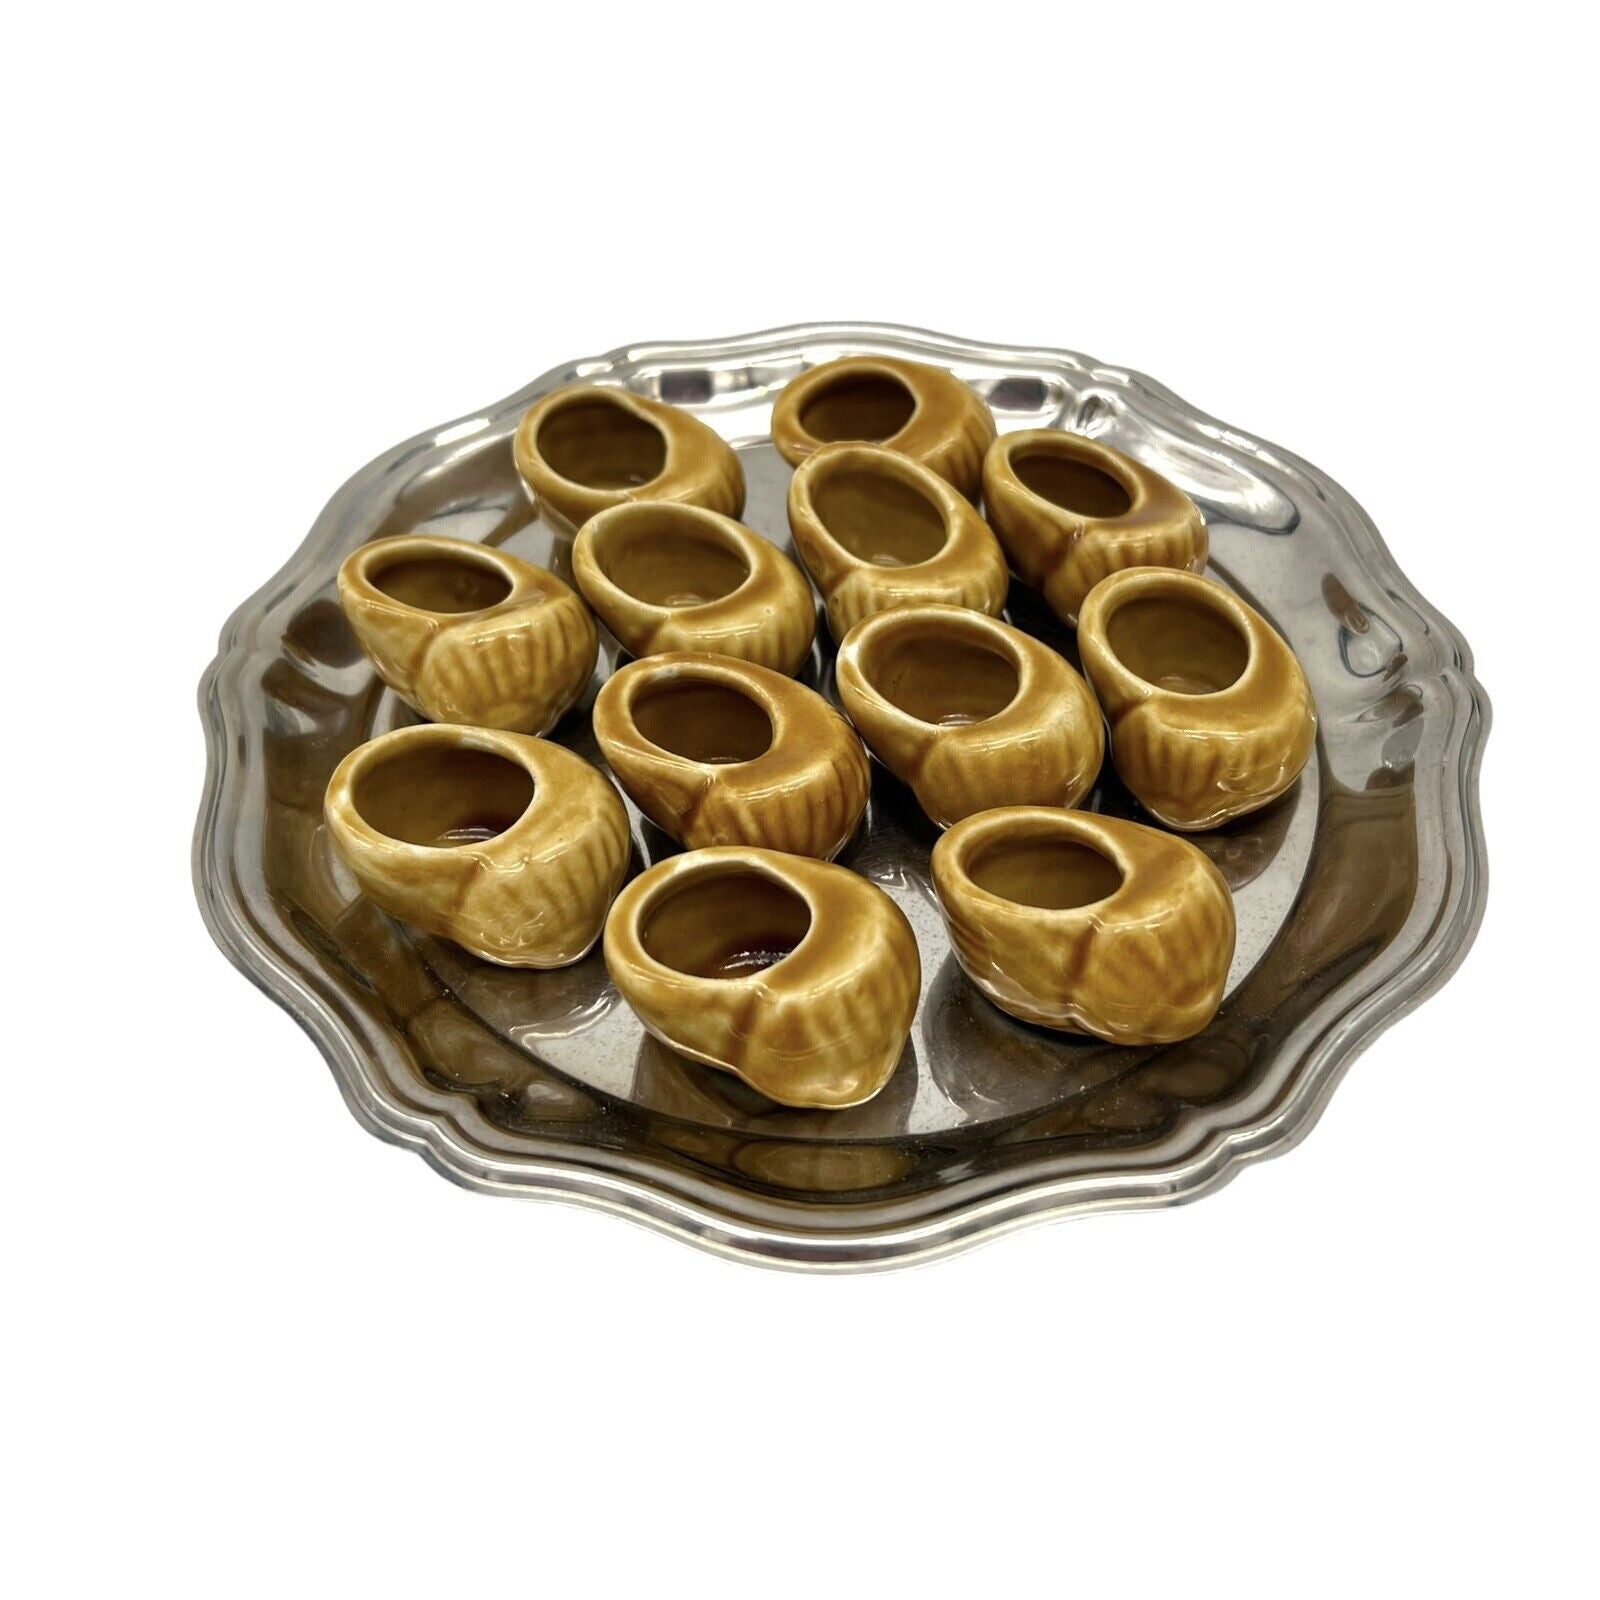 12 French glazed ceramic snail pots on a silver tray with a white background sold by All Things French Store 